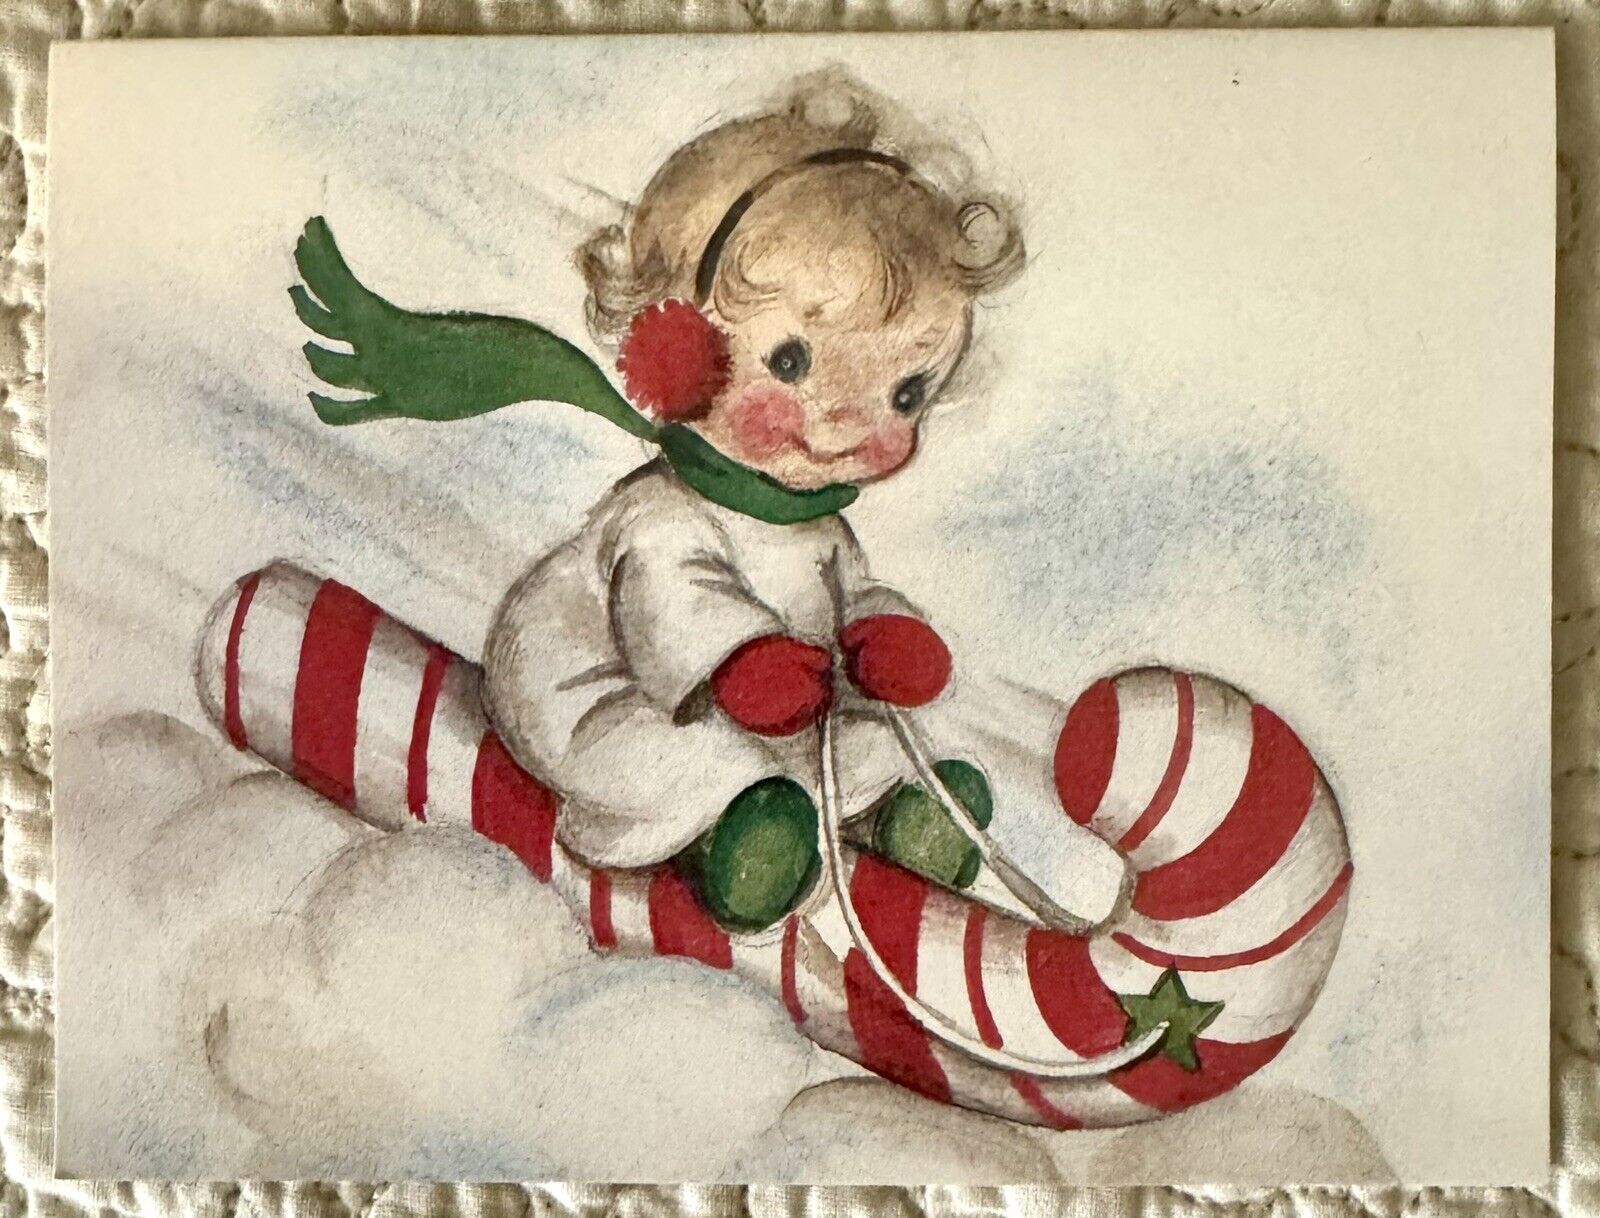 Unused Christmas Child Candy Cane Sled Reproduction Vtg Greeting Card 1970s